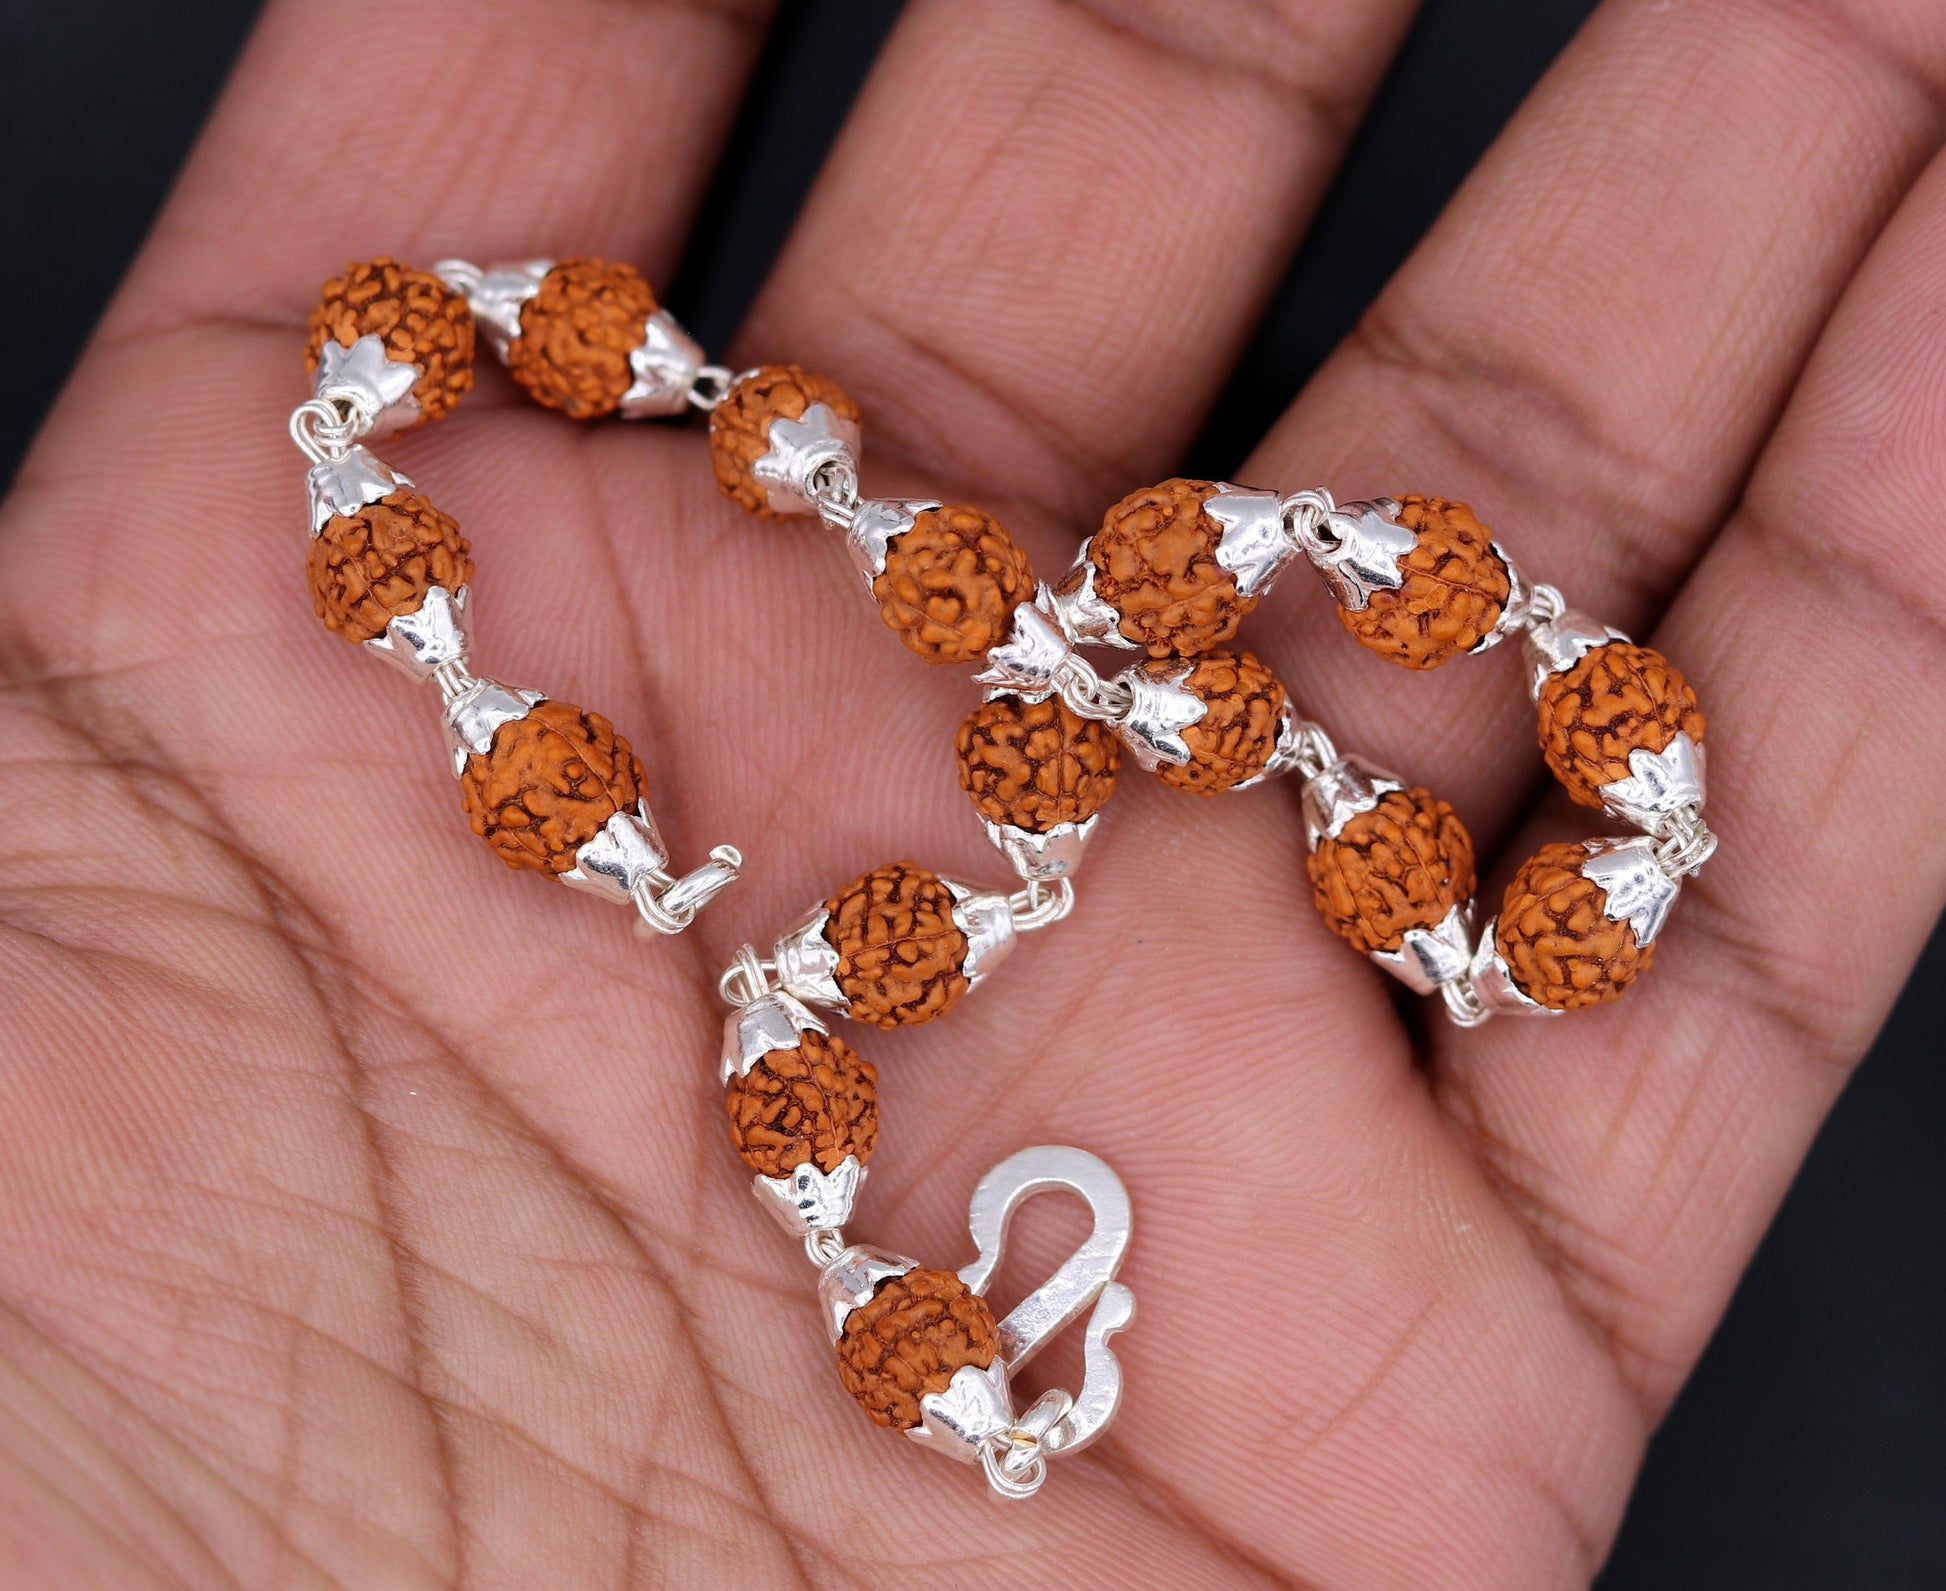 Vintage 925 sterling silver natural rudraksha beads bracelet fabulous wrist jewelry for unisex from india sbr16 - TRIBAL ORNAMENTS